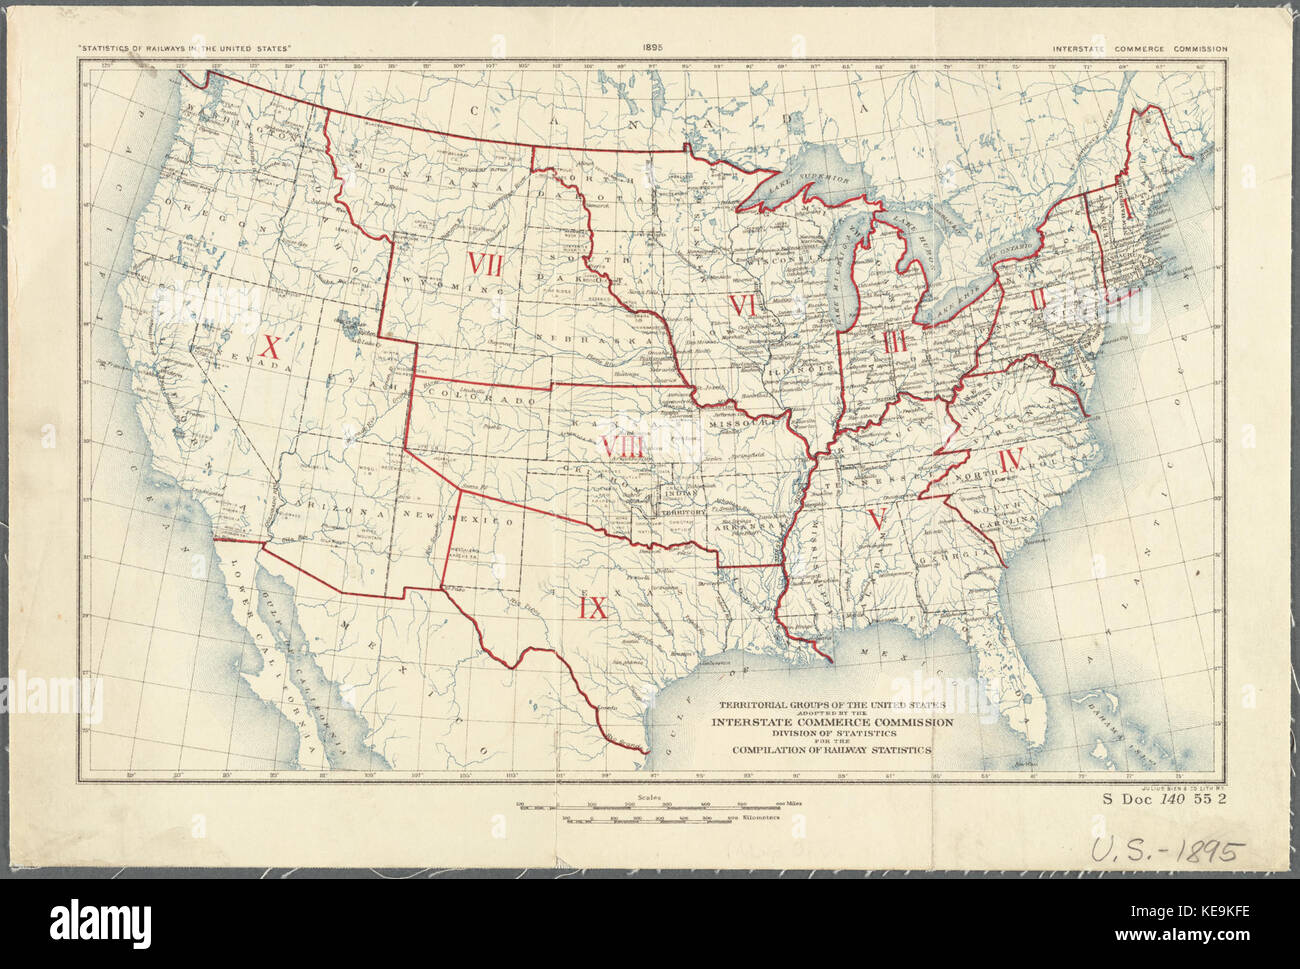 Territorial groups of the United States adopted by the Interstate Commerce Commission Division of Statistics for the compilation of railway statistics (NYPL b20644034 5831479) Stock Photo